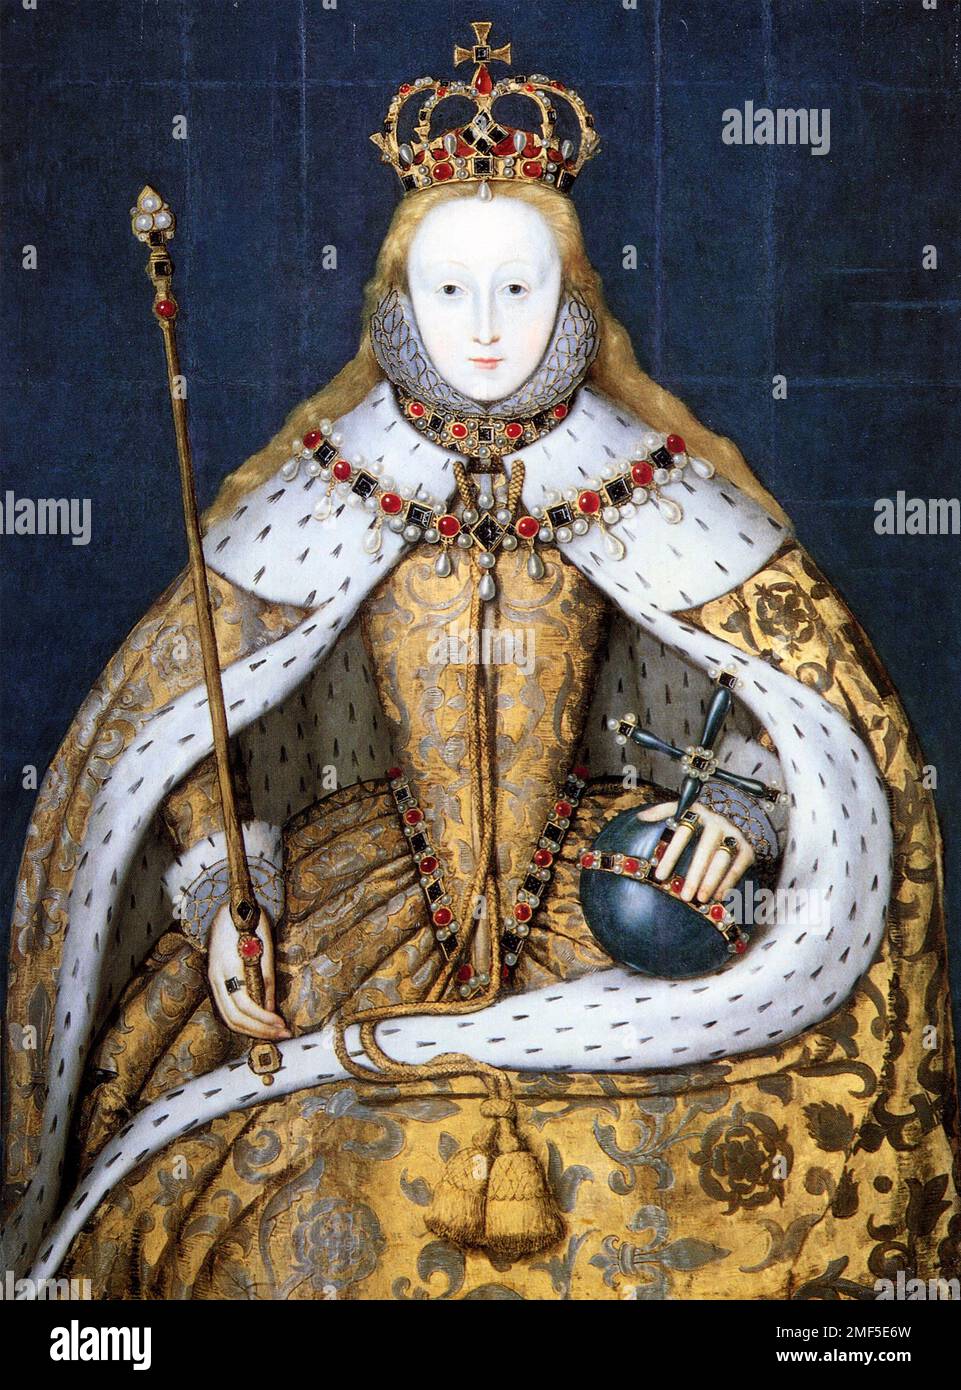 ELIZABETH I (1533-1603)  The Coronation portrait, a copy about 1600 from a lost original by an unknown artist. Stock Photo